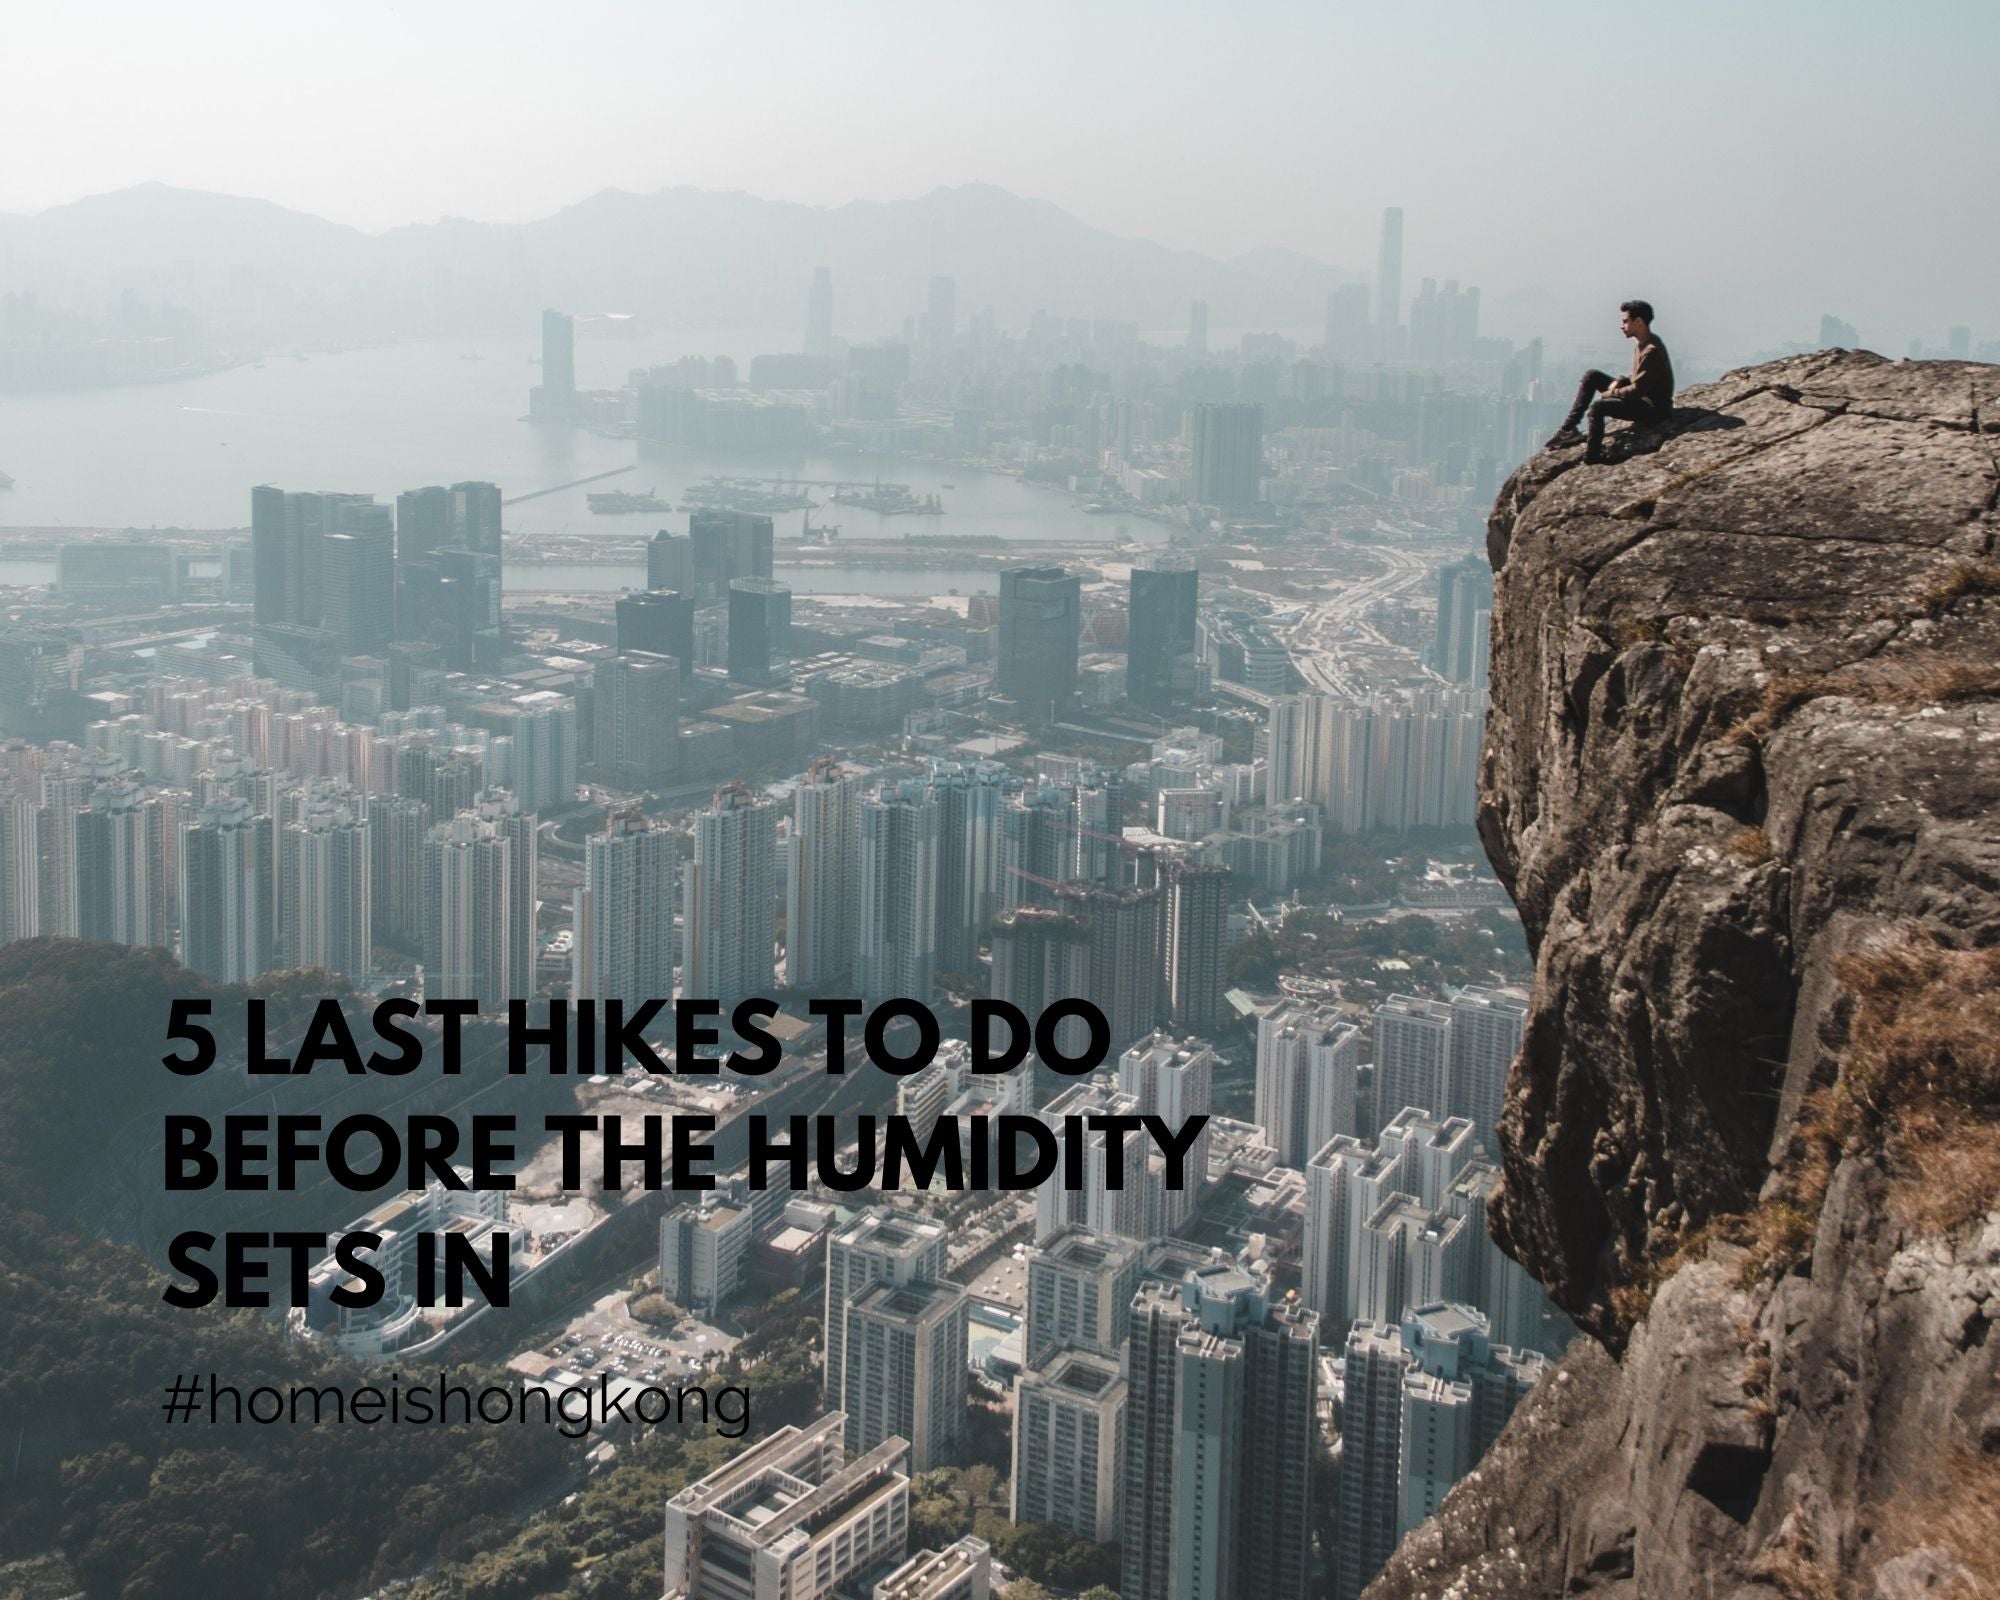 5 last hikes to do before the humidity sets in